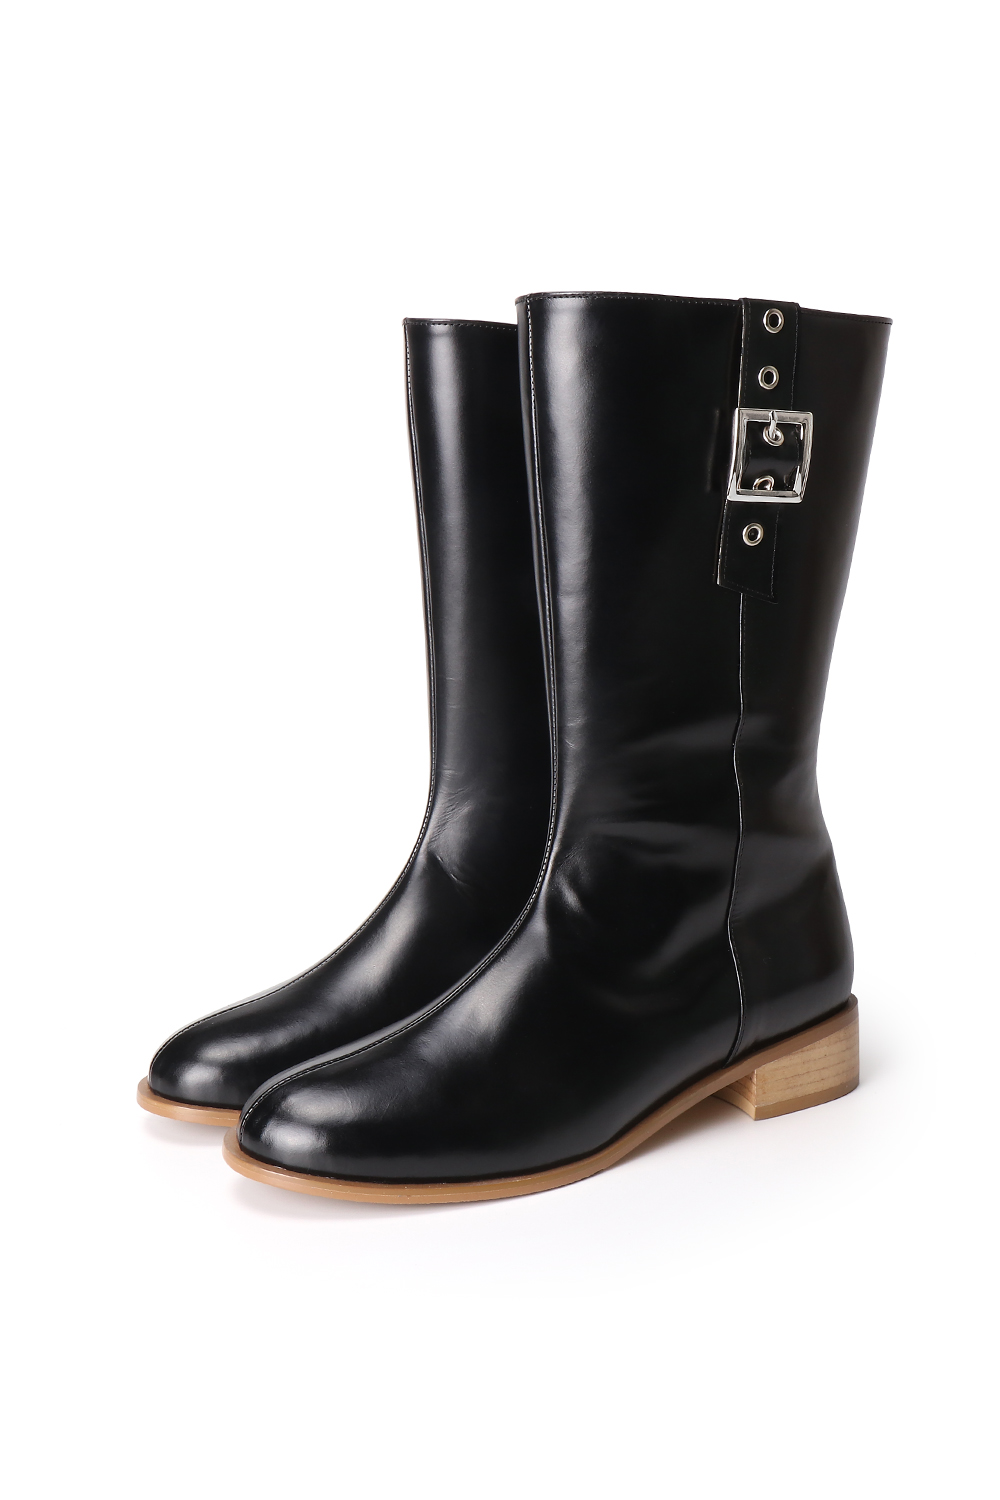 MAY BUCKLE MIDDLE BOOTS [BLACK]